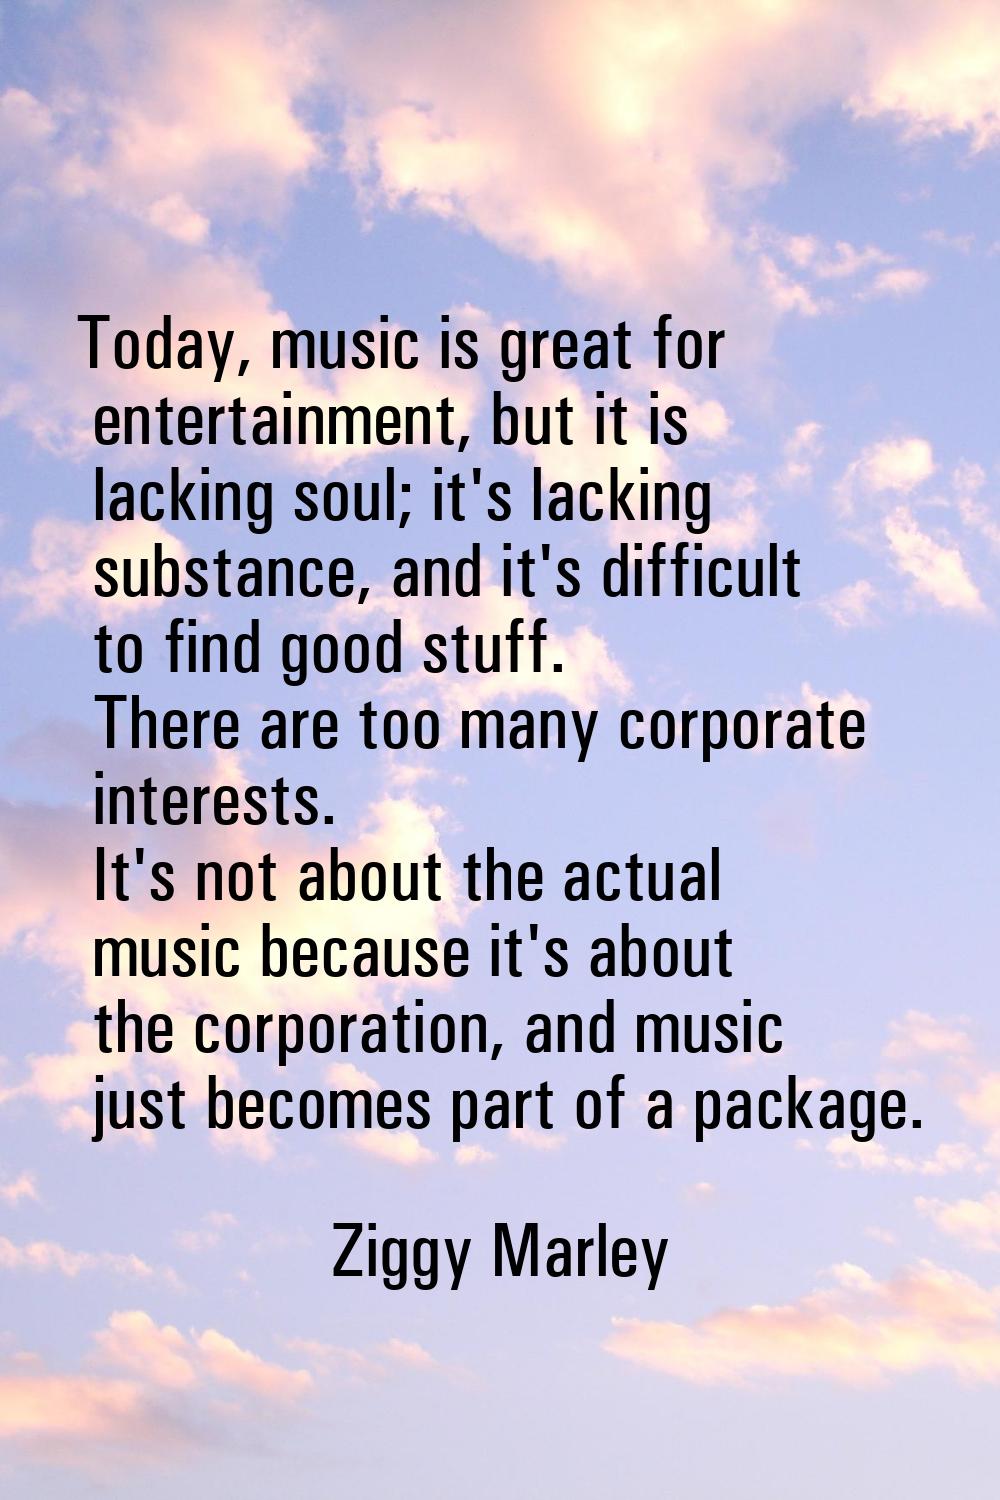 Today, music is great for entertainment, but it is lacking soul; it's lacking substance, and it's d